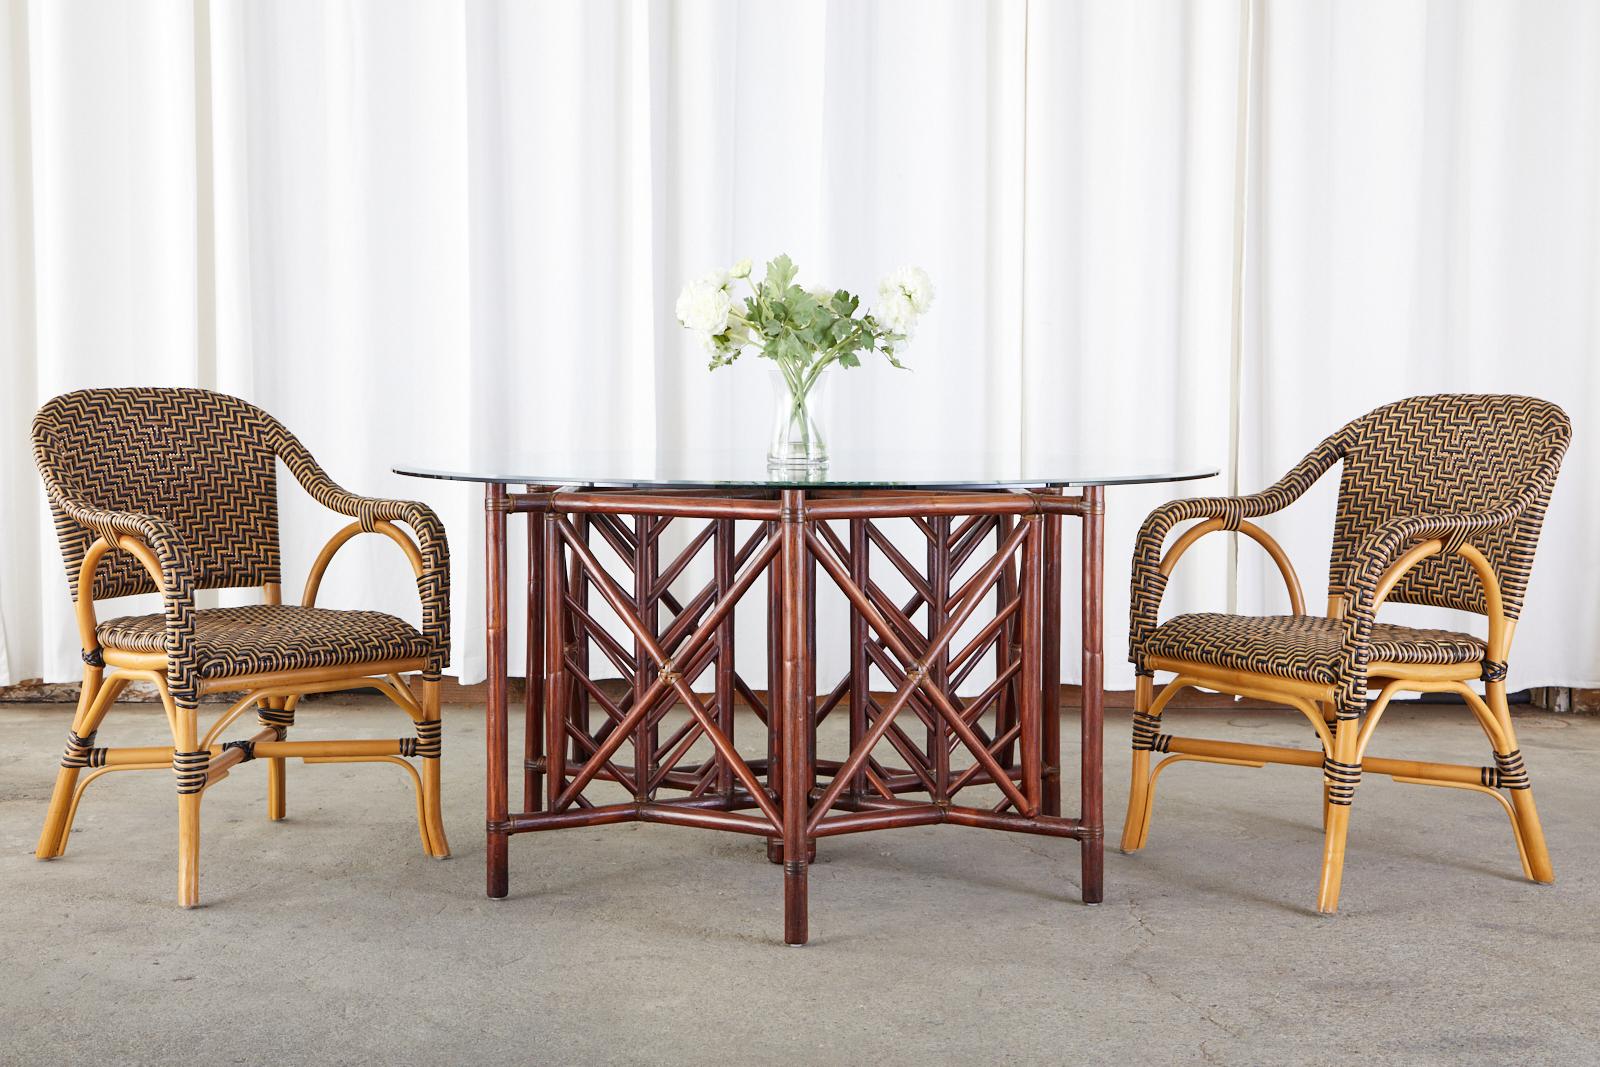 Delightful set of four bistro cafe style dining armchairs made by Palecek. The chairs feature a black and tan woven seat, back, and arms with a chevron/herringbone style design. Reminiscent of French art deco period designs with sinuous lines and